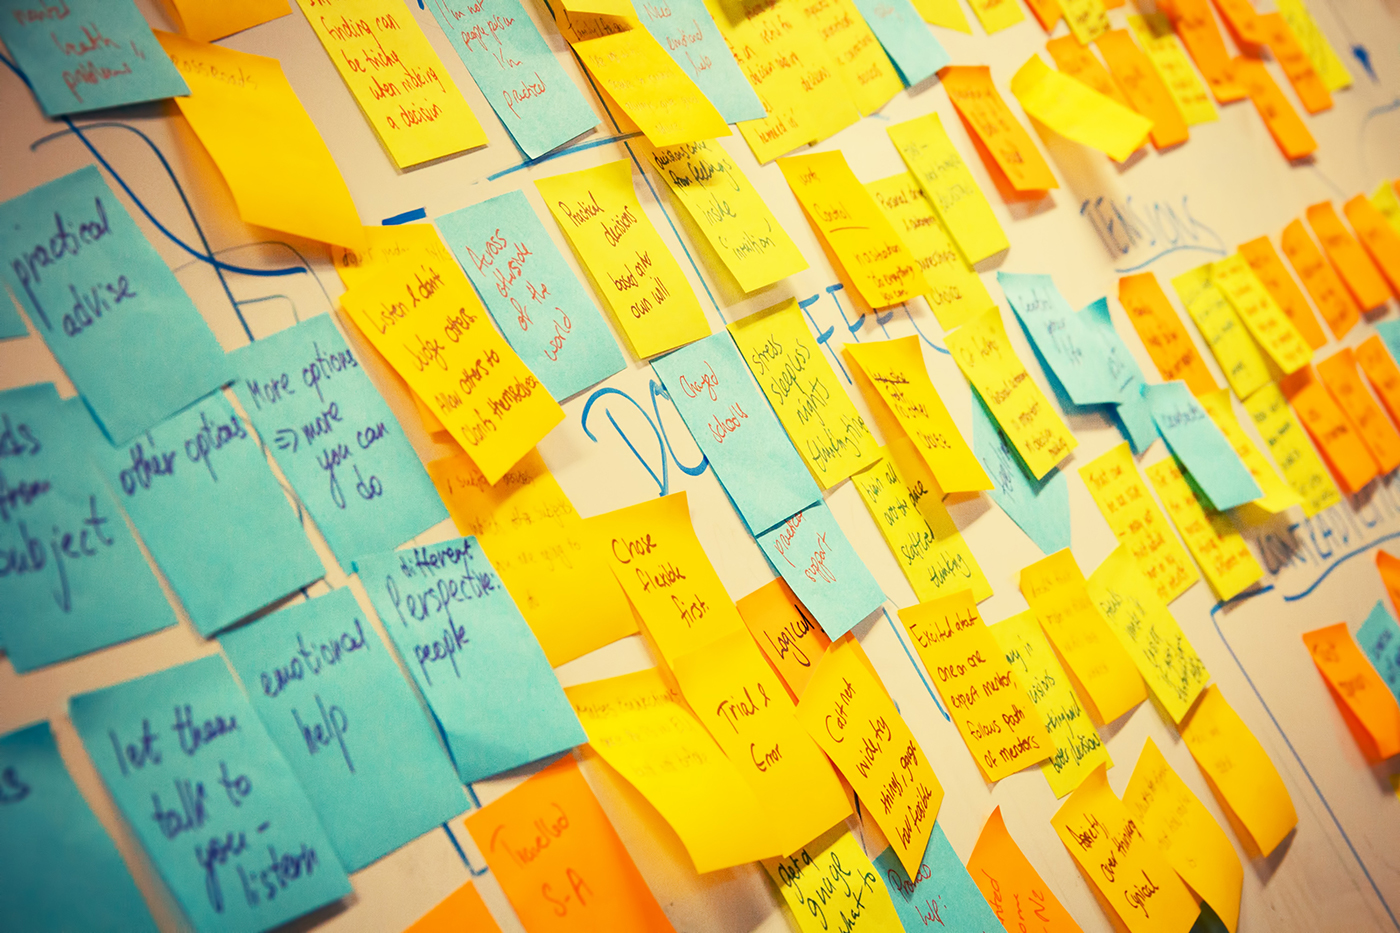 A whiteboard covered in Post-It notes.